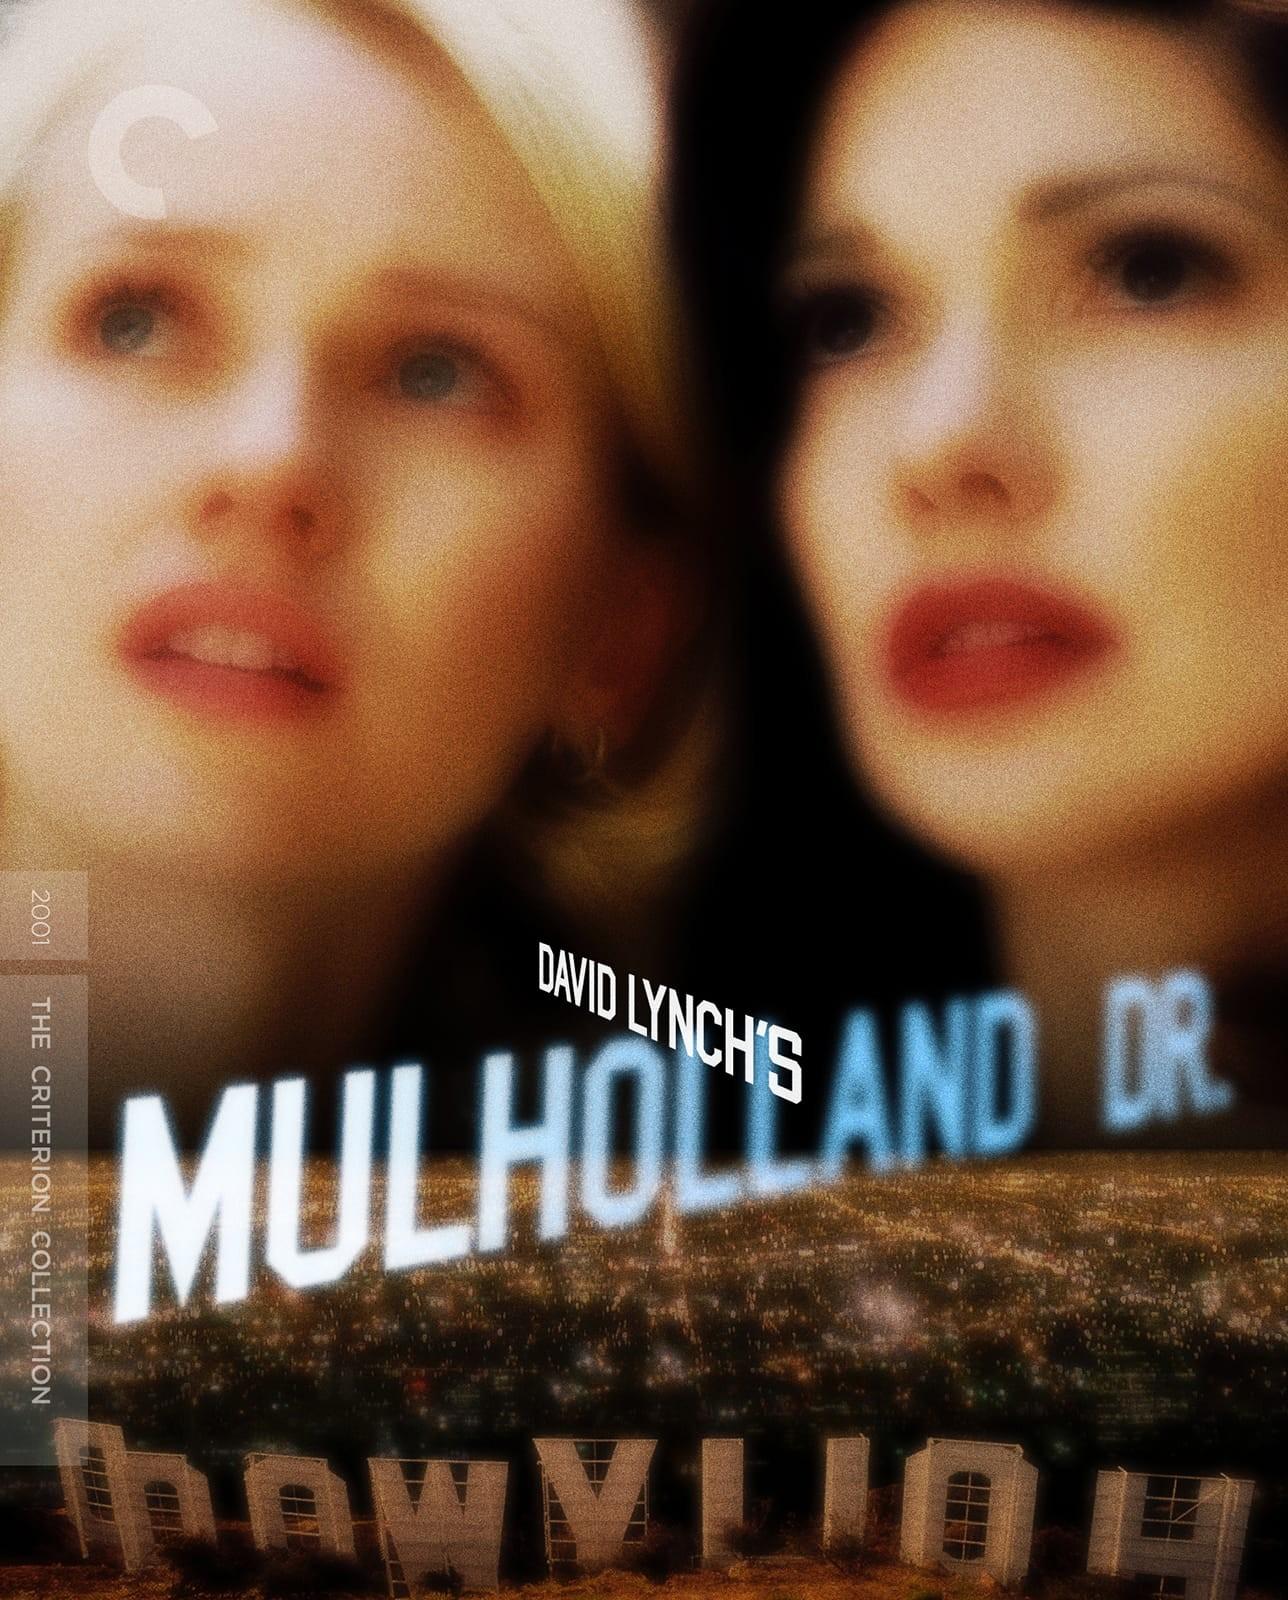 Mulholland Dr. (2001). The Criterion Collection